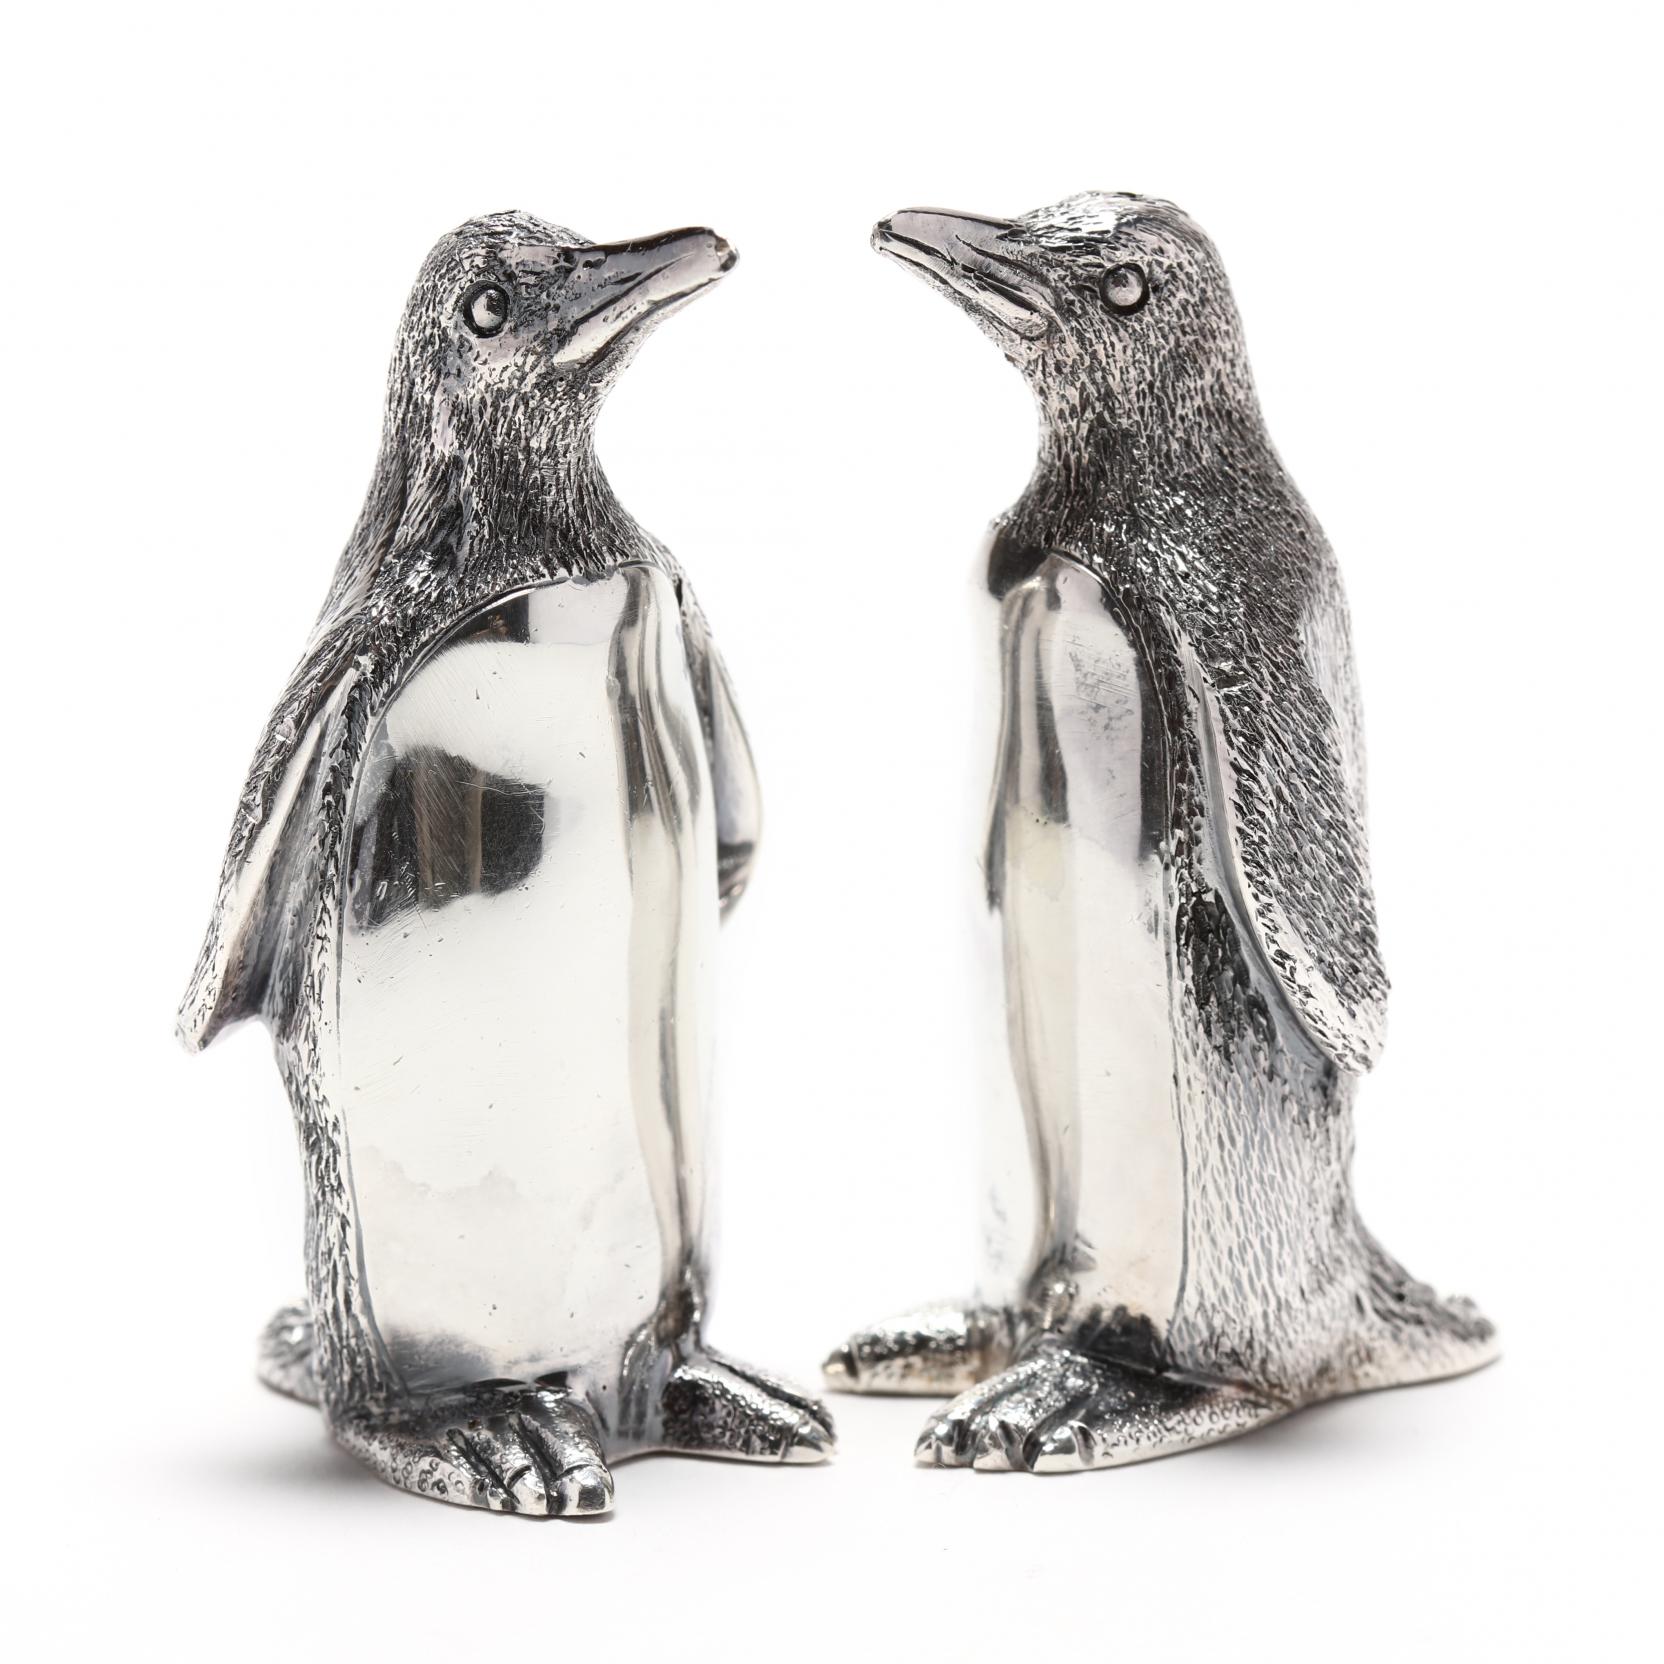 Tiffany & Co., A Set of Four Silver-Gilt Frog Salt and Pepper Shakers,  19671